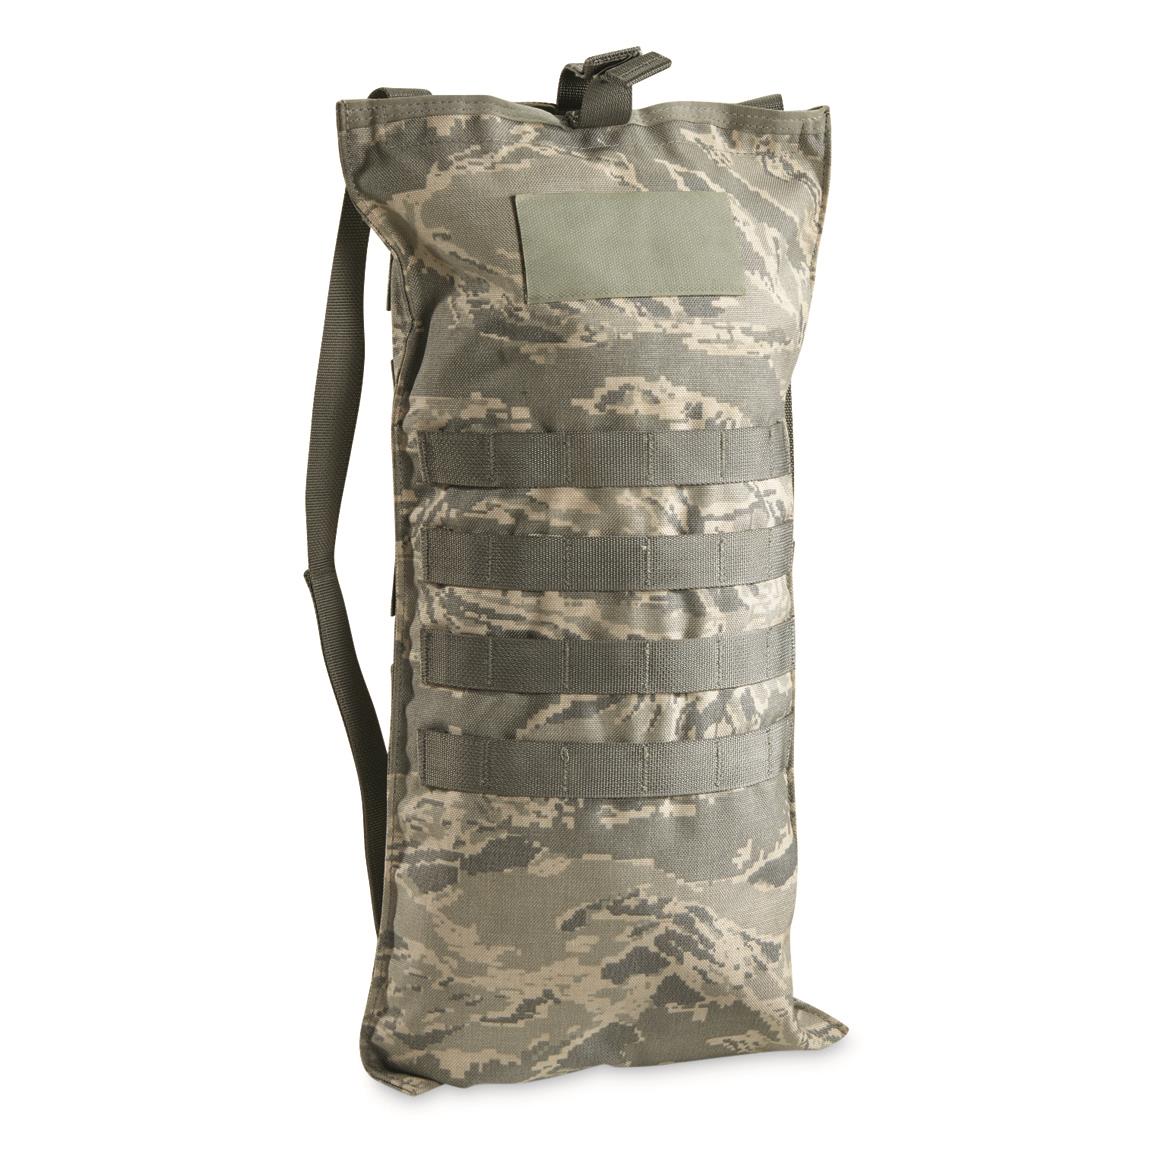 U.S. Air Force Surplus Hydration Carrier Pouch, Used, ABU Camo